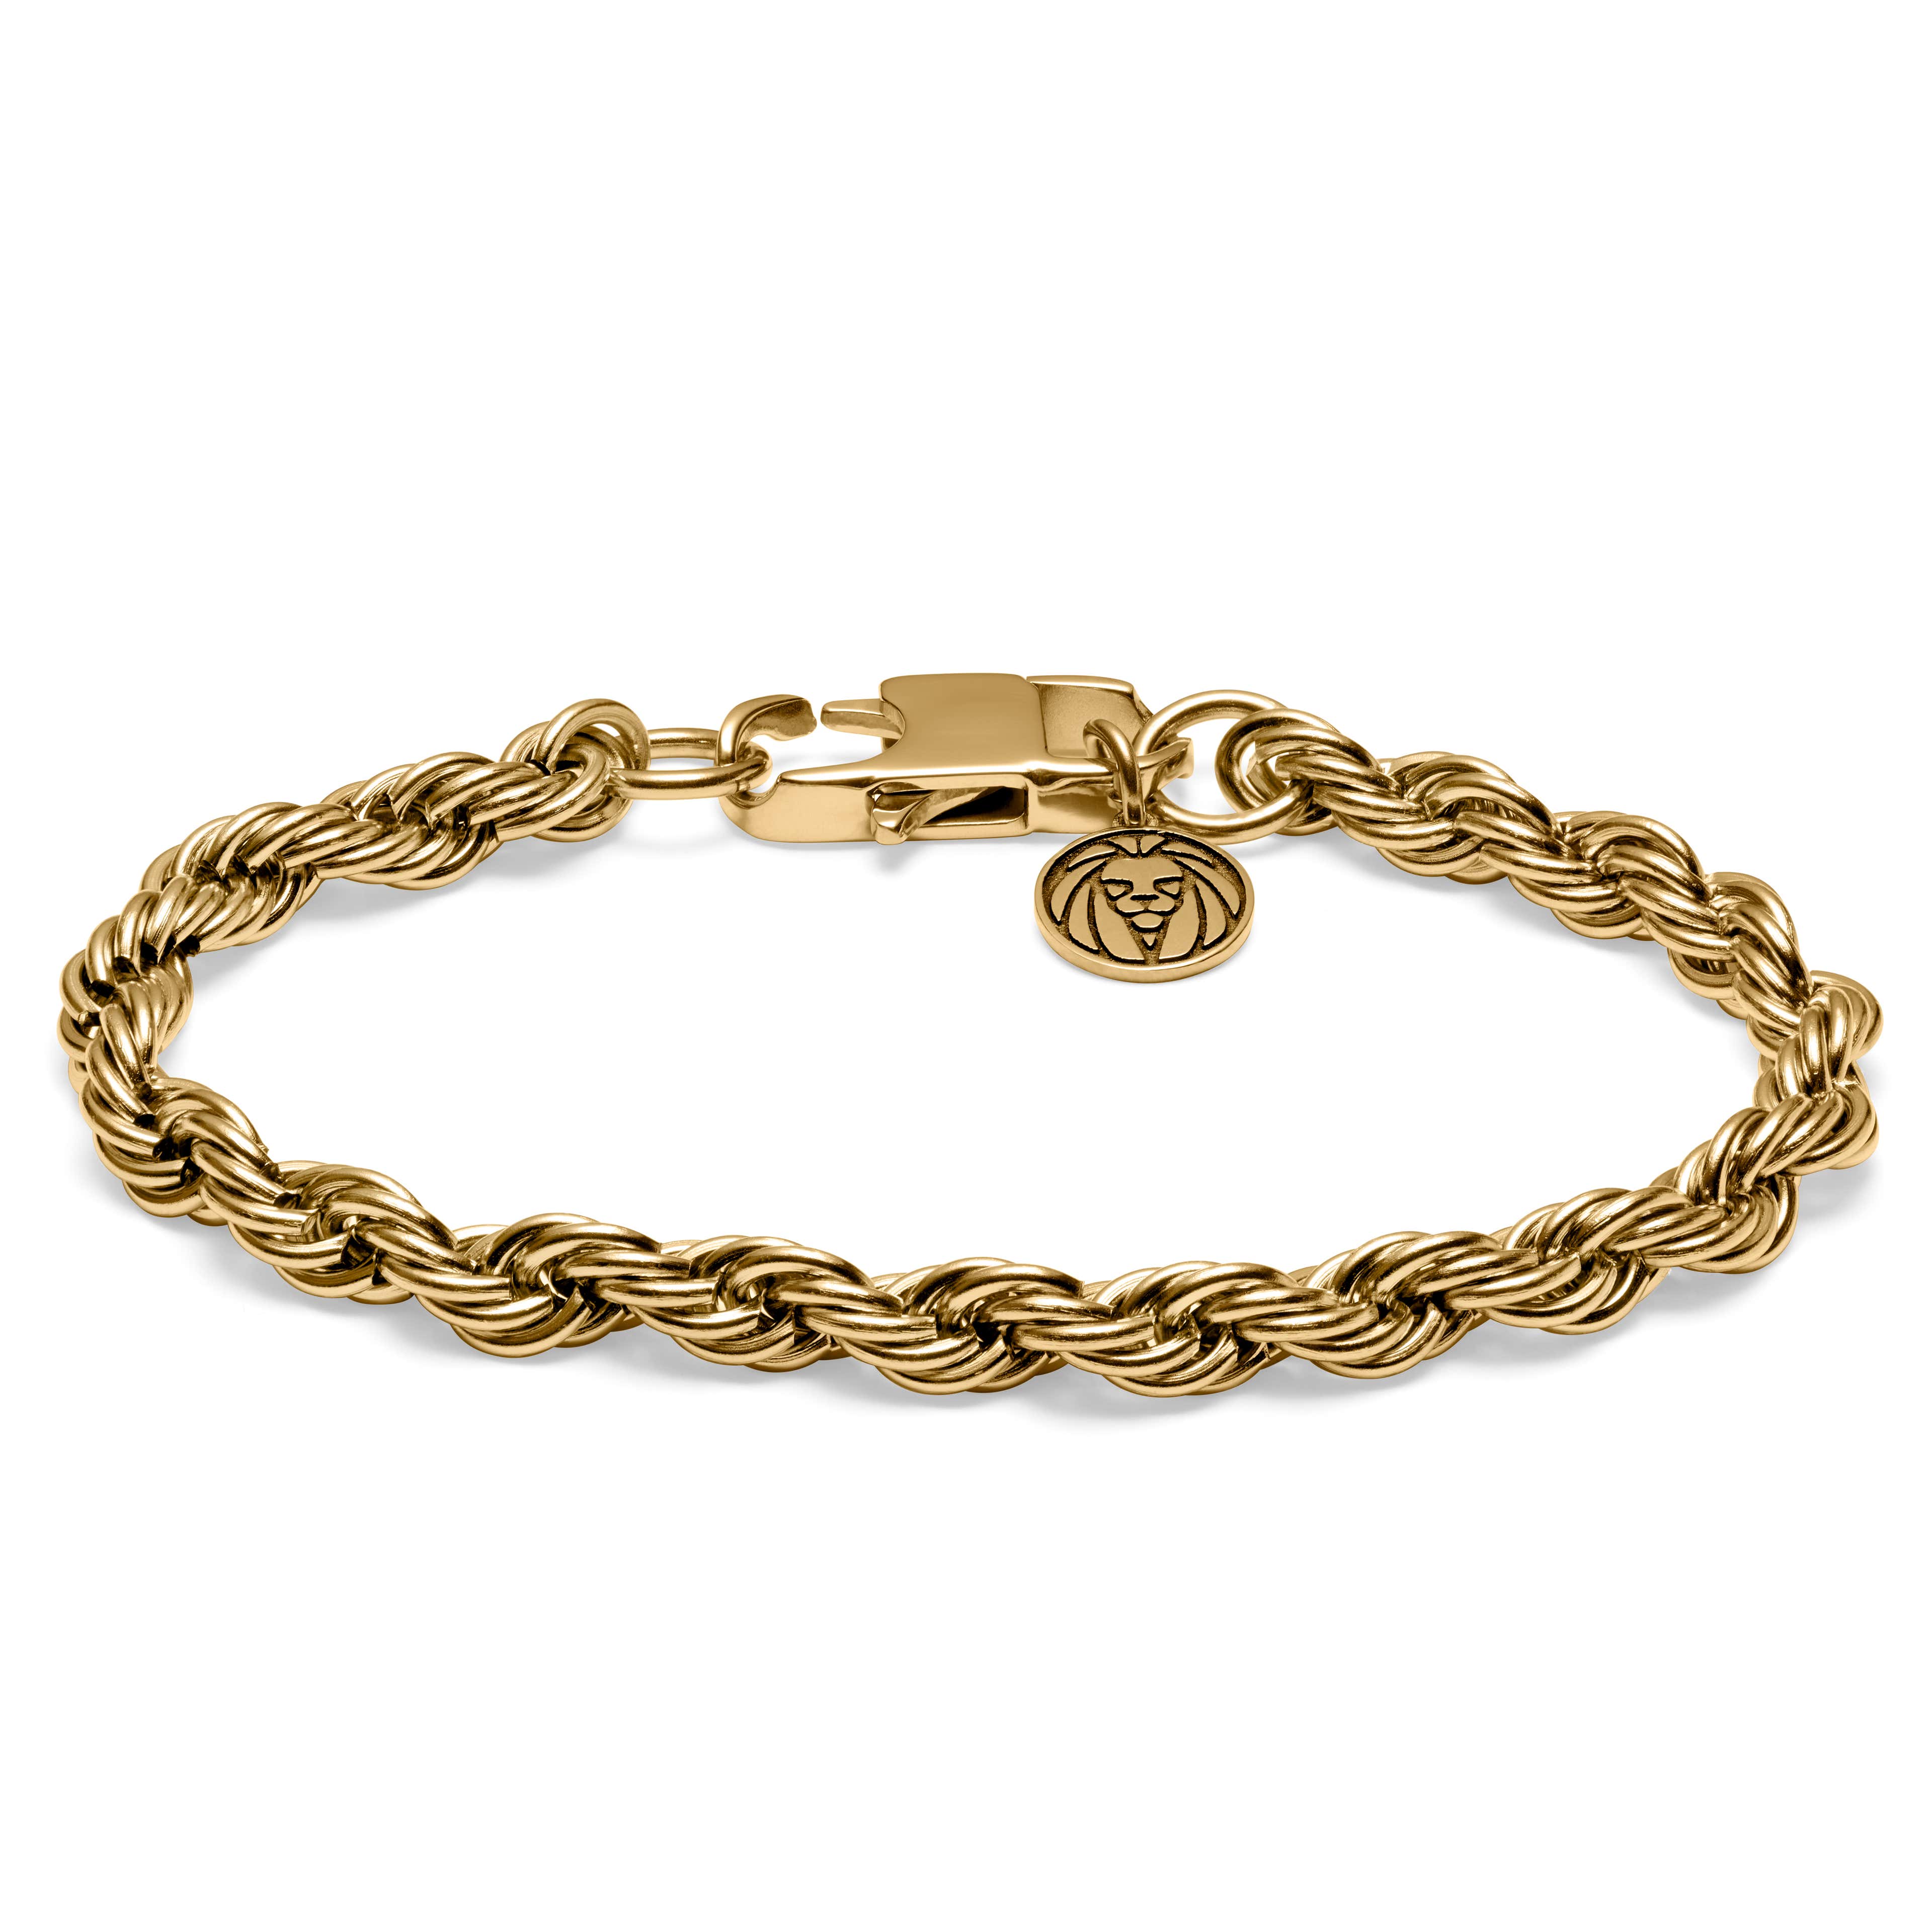 Corwin Amager Gold-Tone 6mm Rope Chain Bracelet